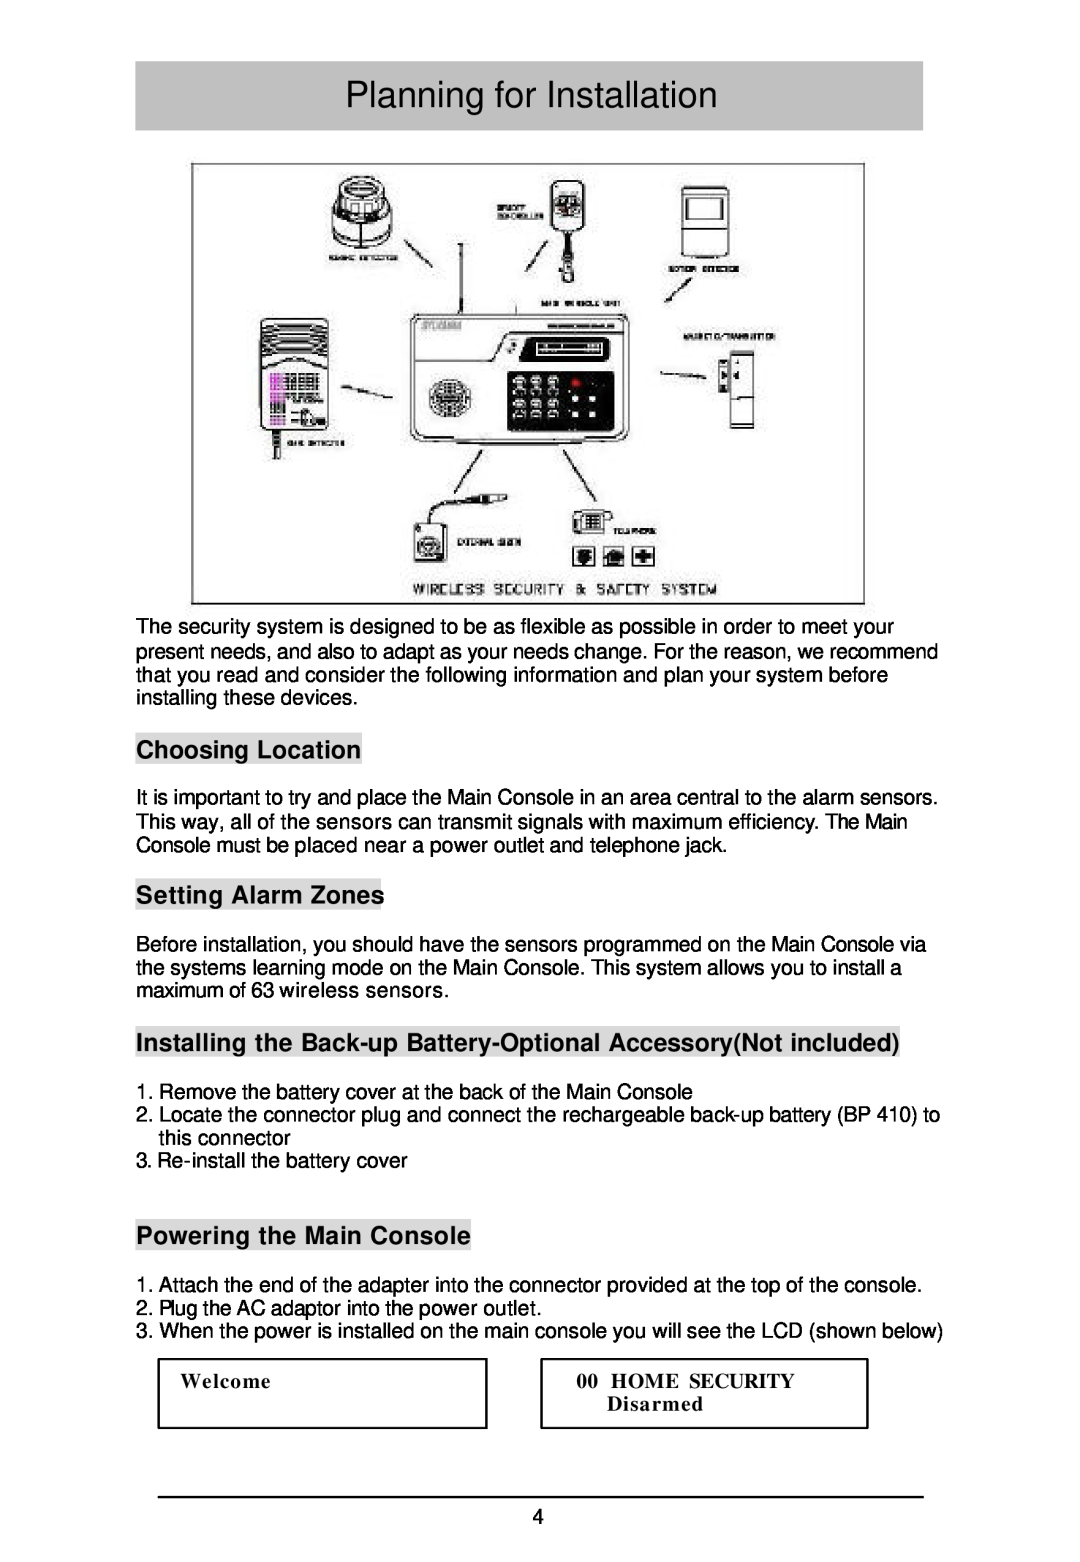 Sylvania SY4100 owner manual Planning for Installation, Choosing Location, Setting Alarm Zones, Powering the Main Console 